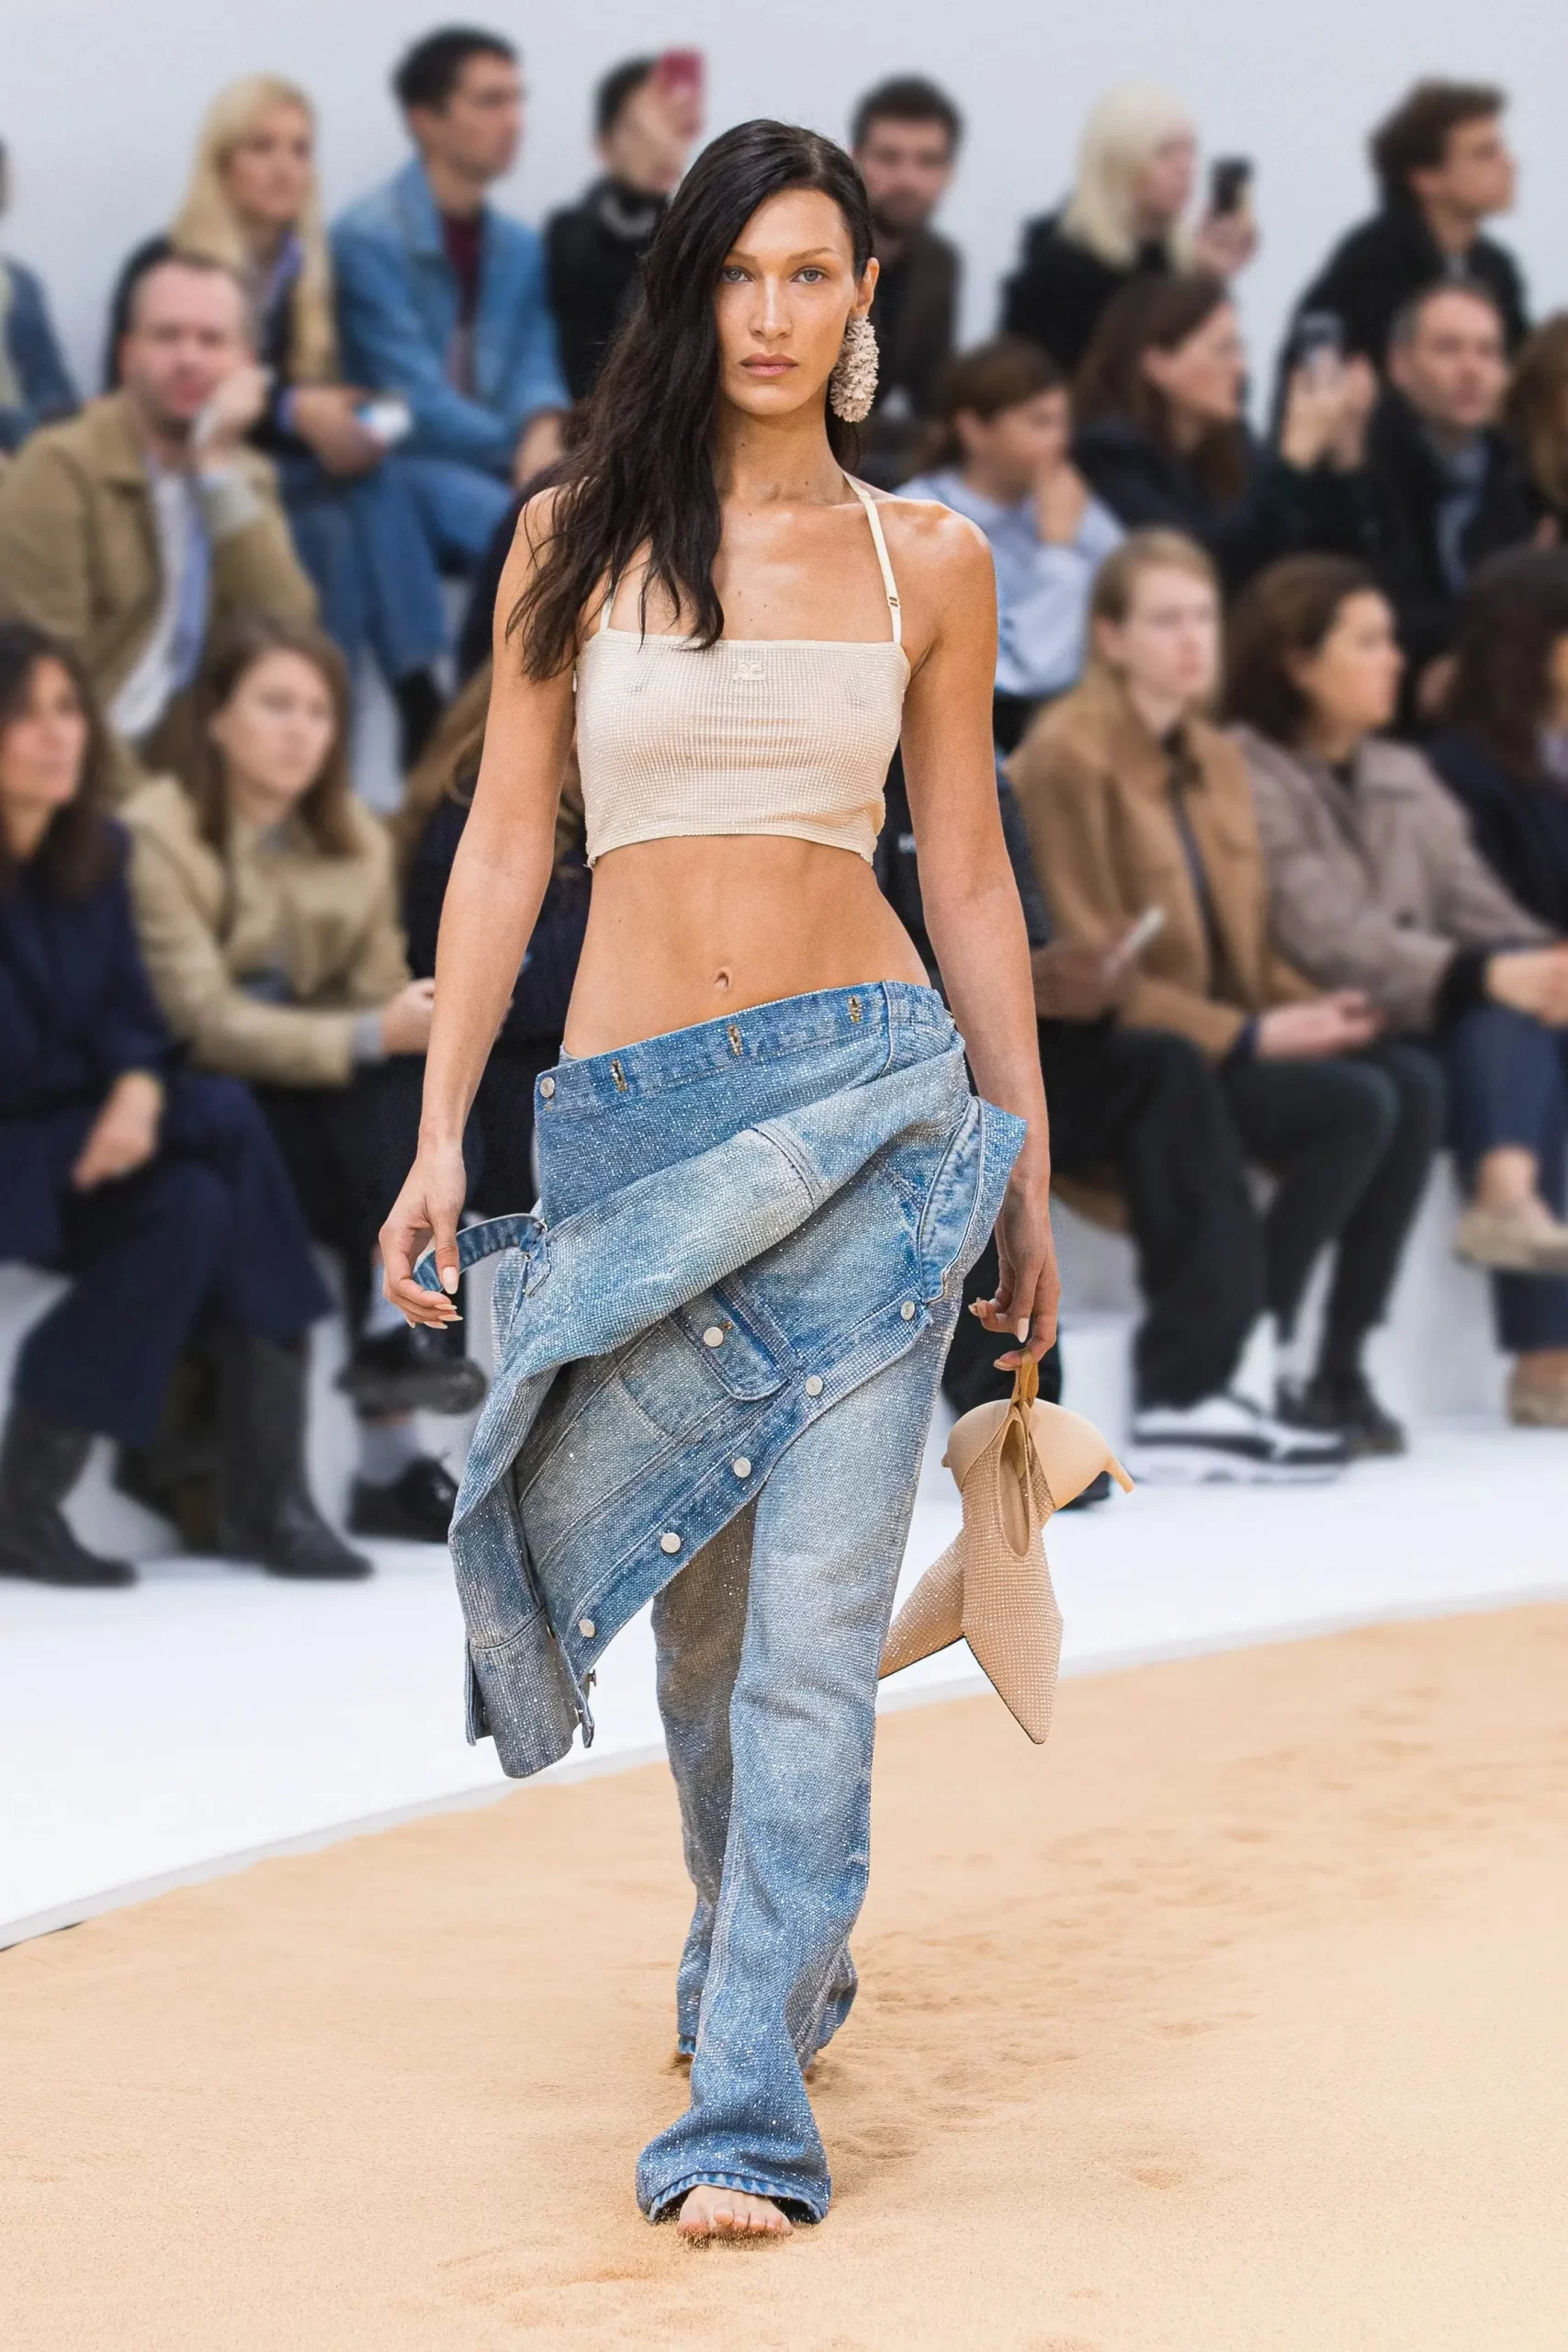 “The Rise of Designer Jeans: A Look at High-End Denim”